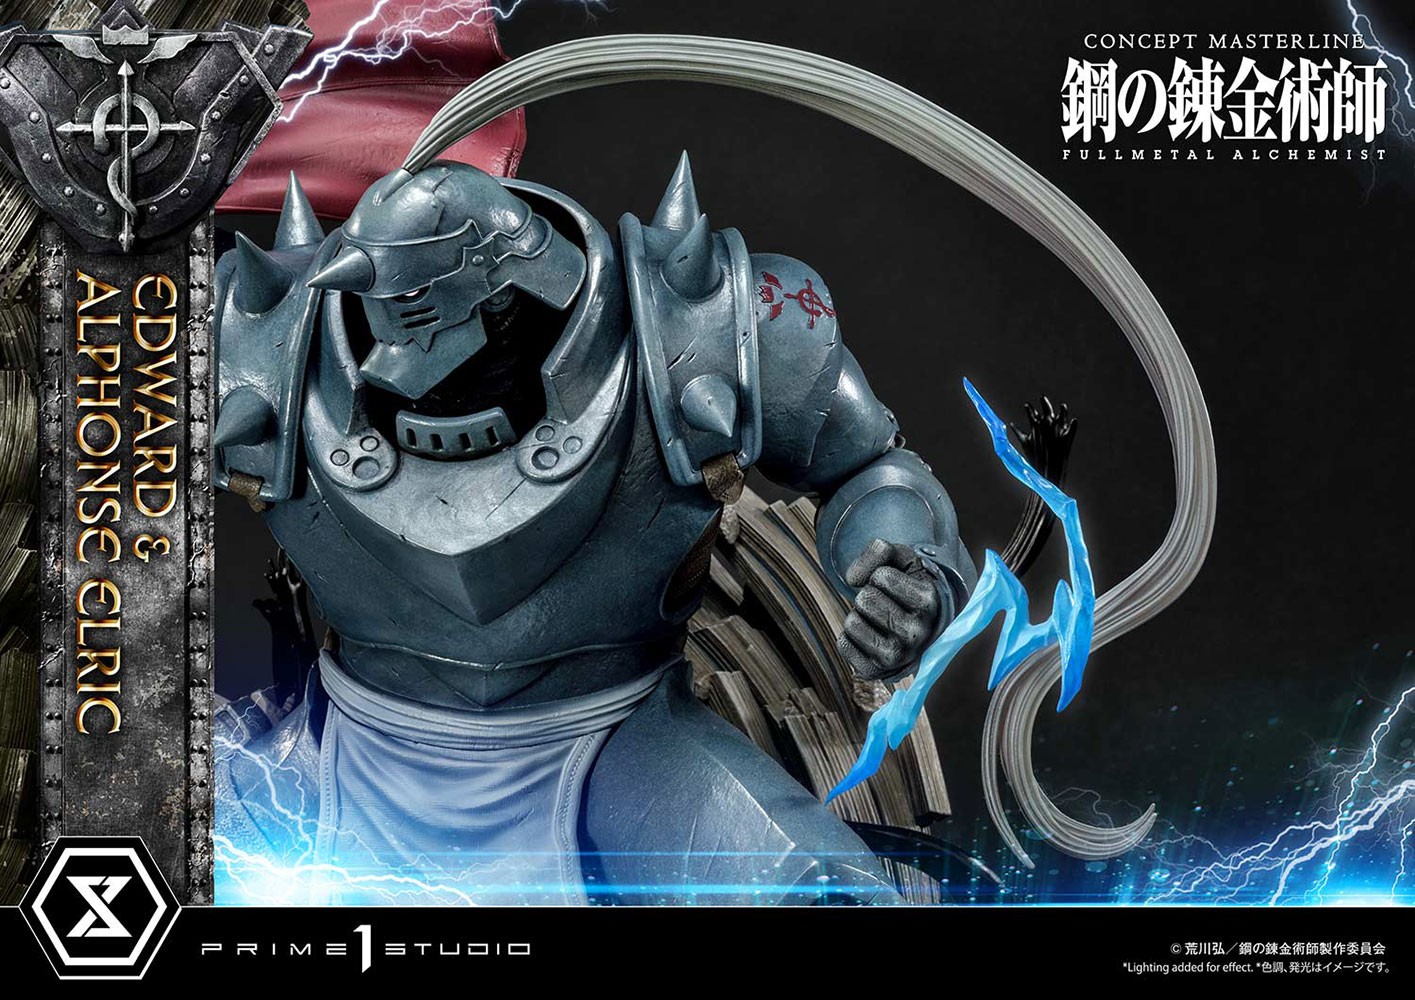 Edward and Alphonse Elric (Deluxe Version)